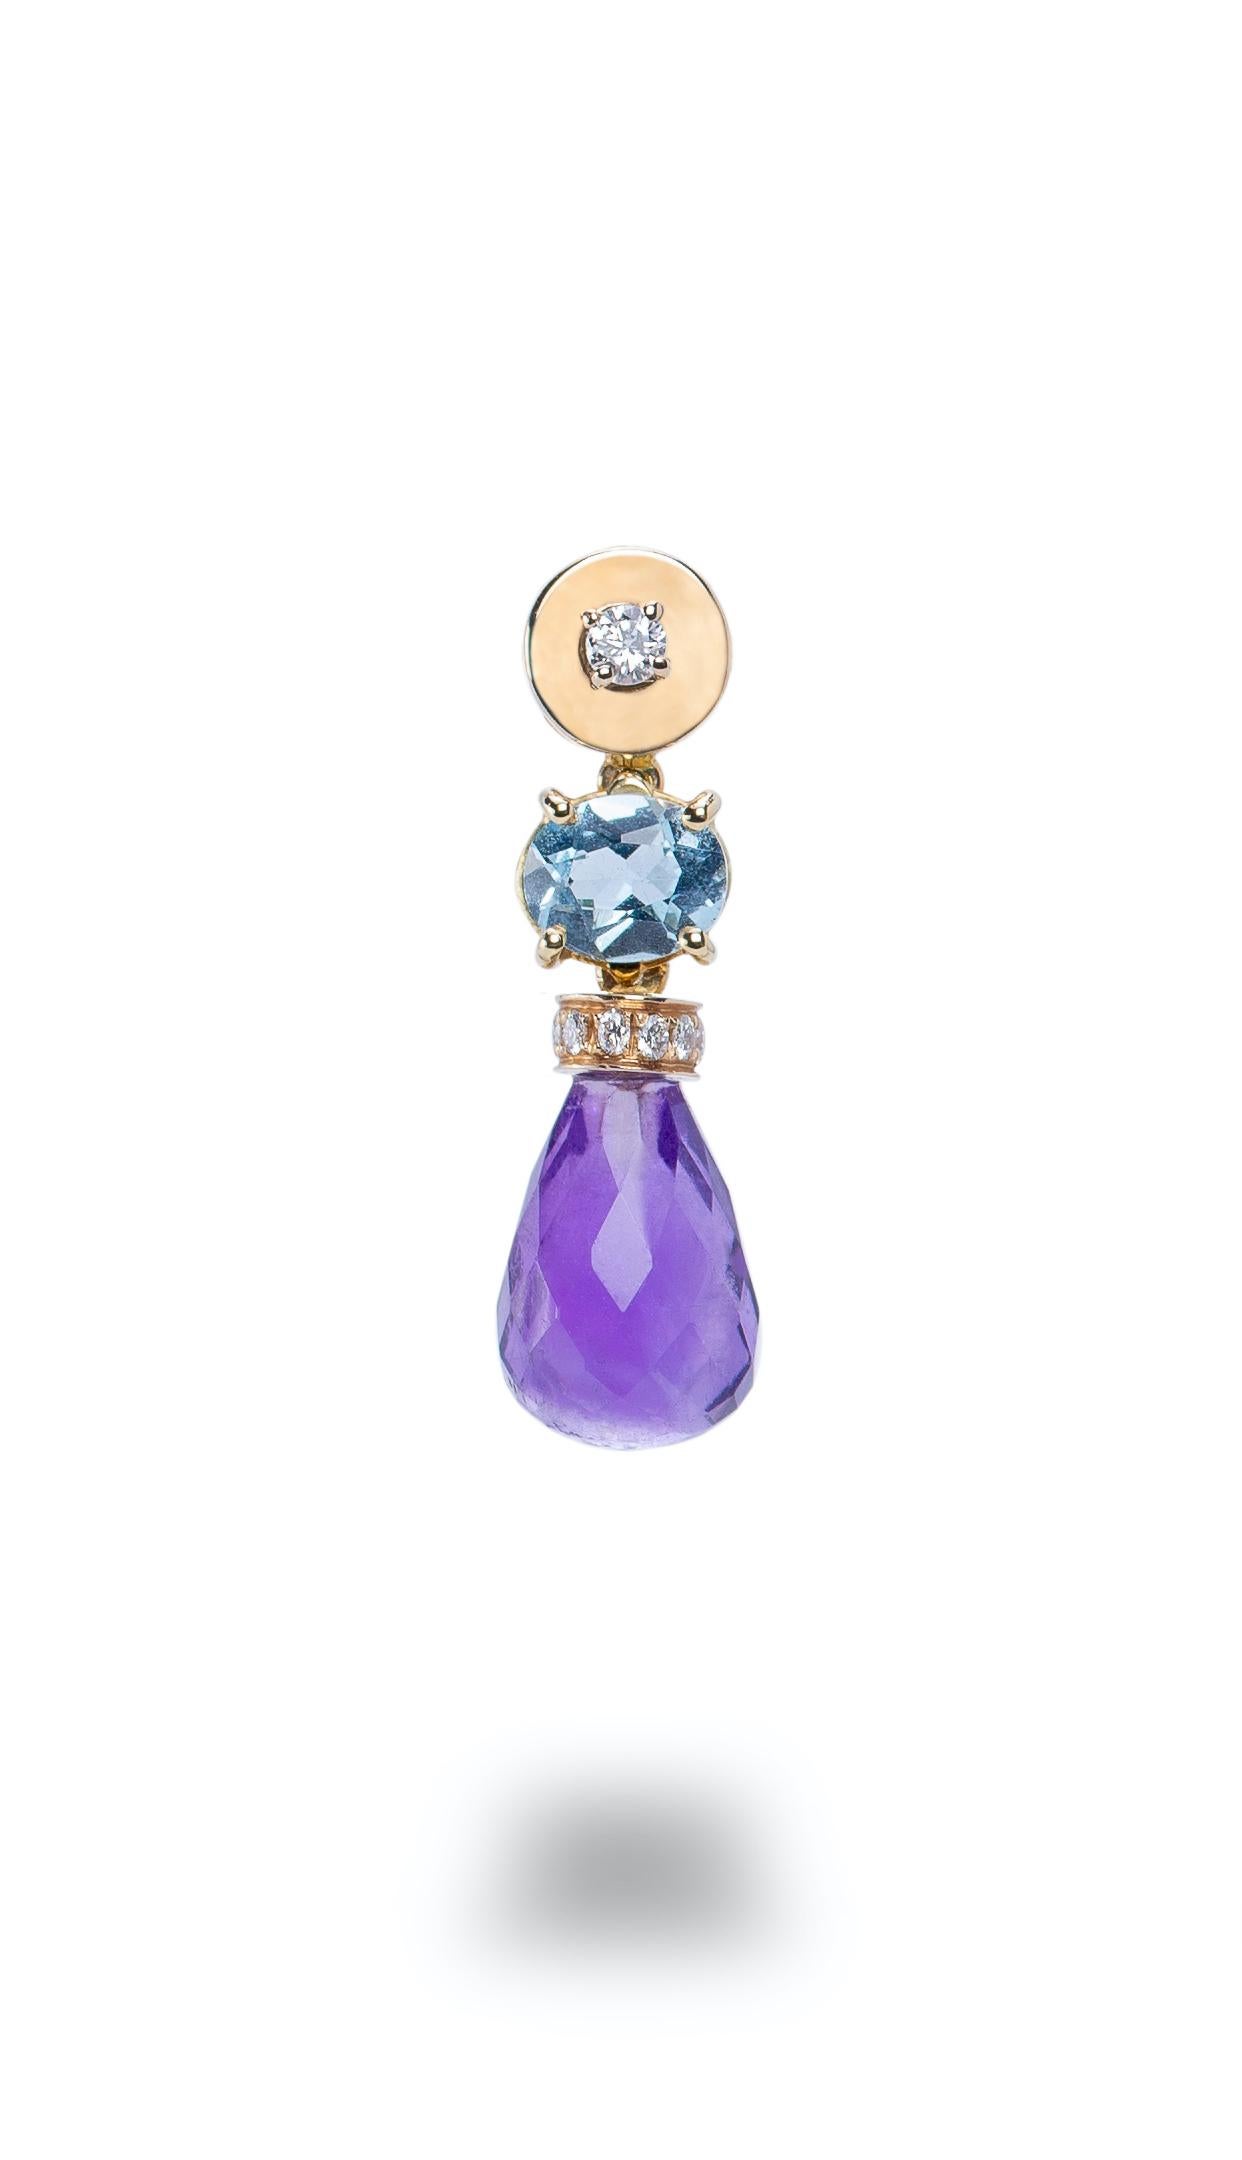 Rossella Ugolini Deco Style Collection 18 Karat Yellow Gold 0.30 Karat White Diamond Blue Topaz Amethyst Grapes Drop Earrings. A flat Yellow Gold disc rests on the lobe and has a White Diamond set in a white gold prong at its centre. The earring is